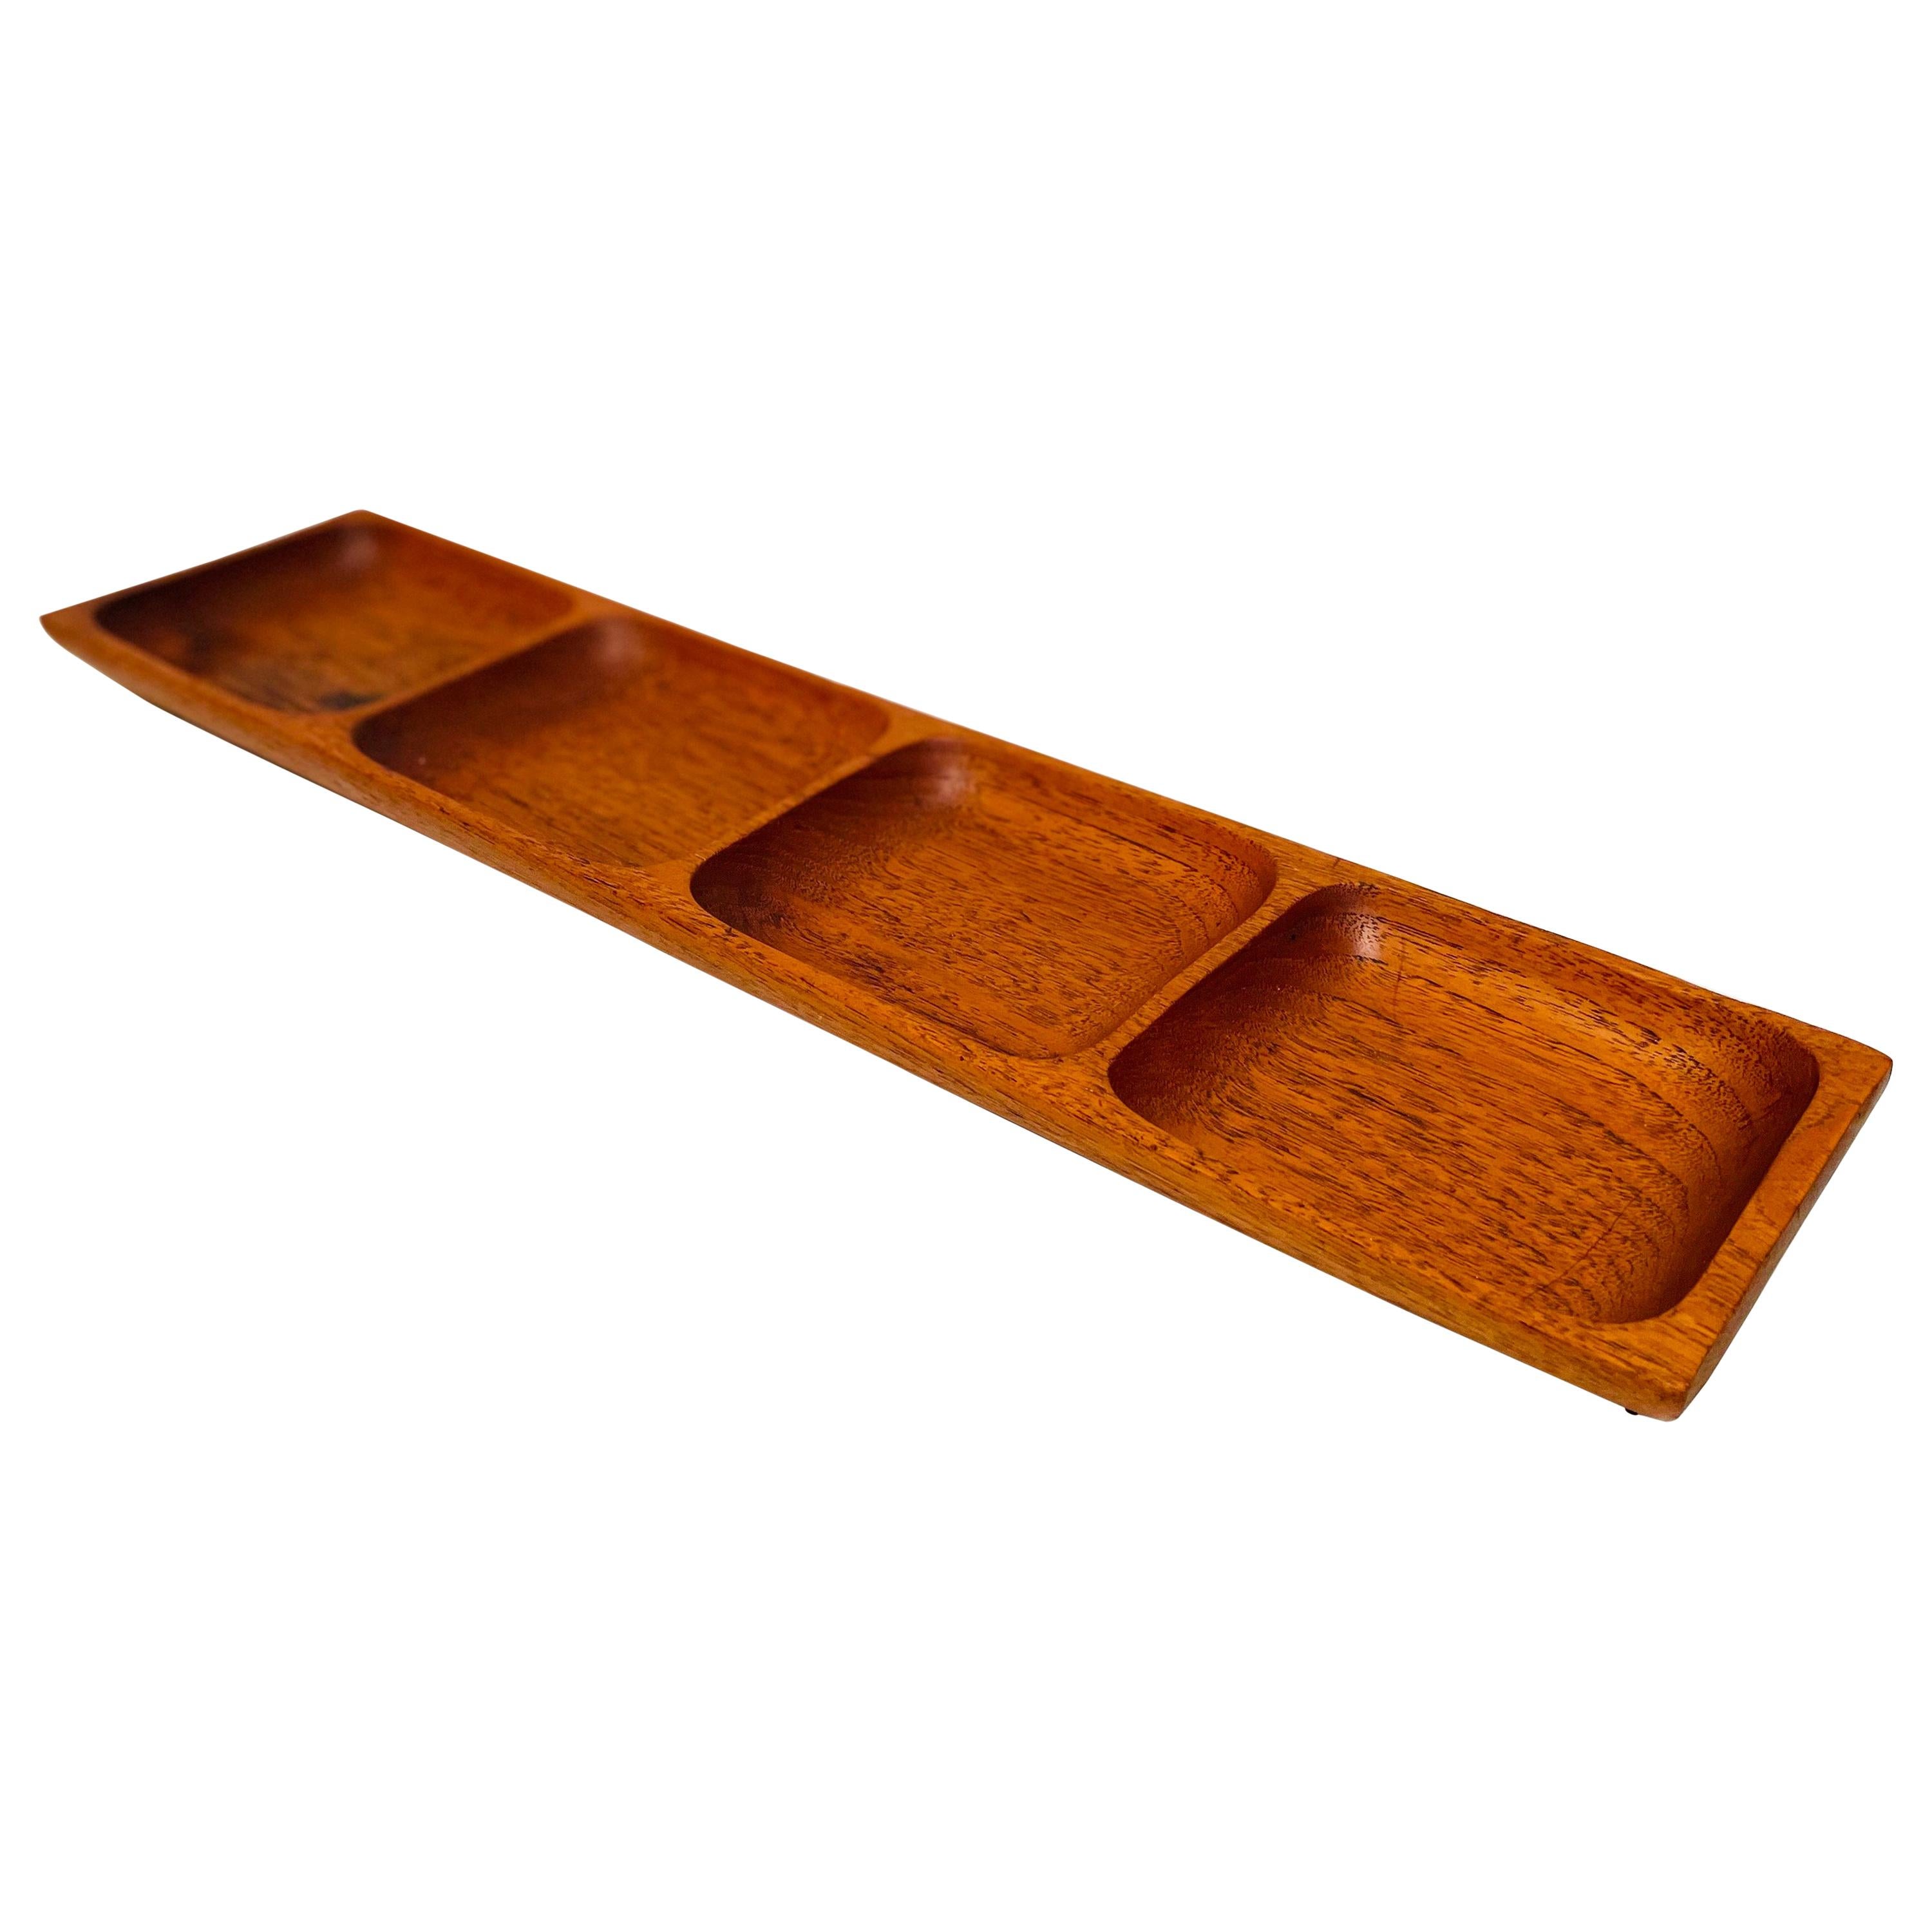 Teak Catch All or Jewelry Holder, 1960s For Sale